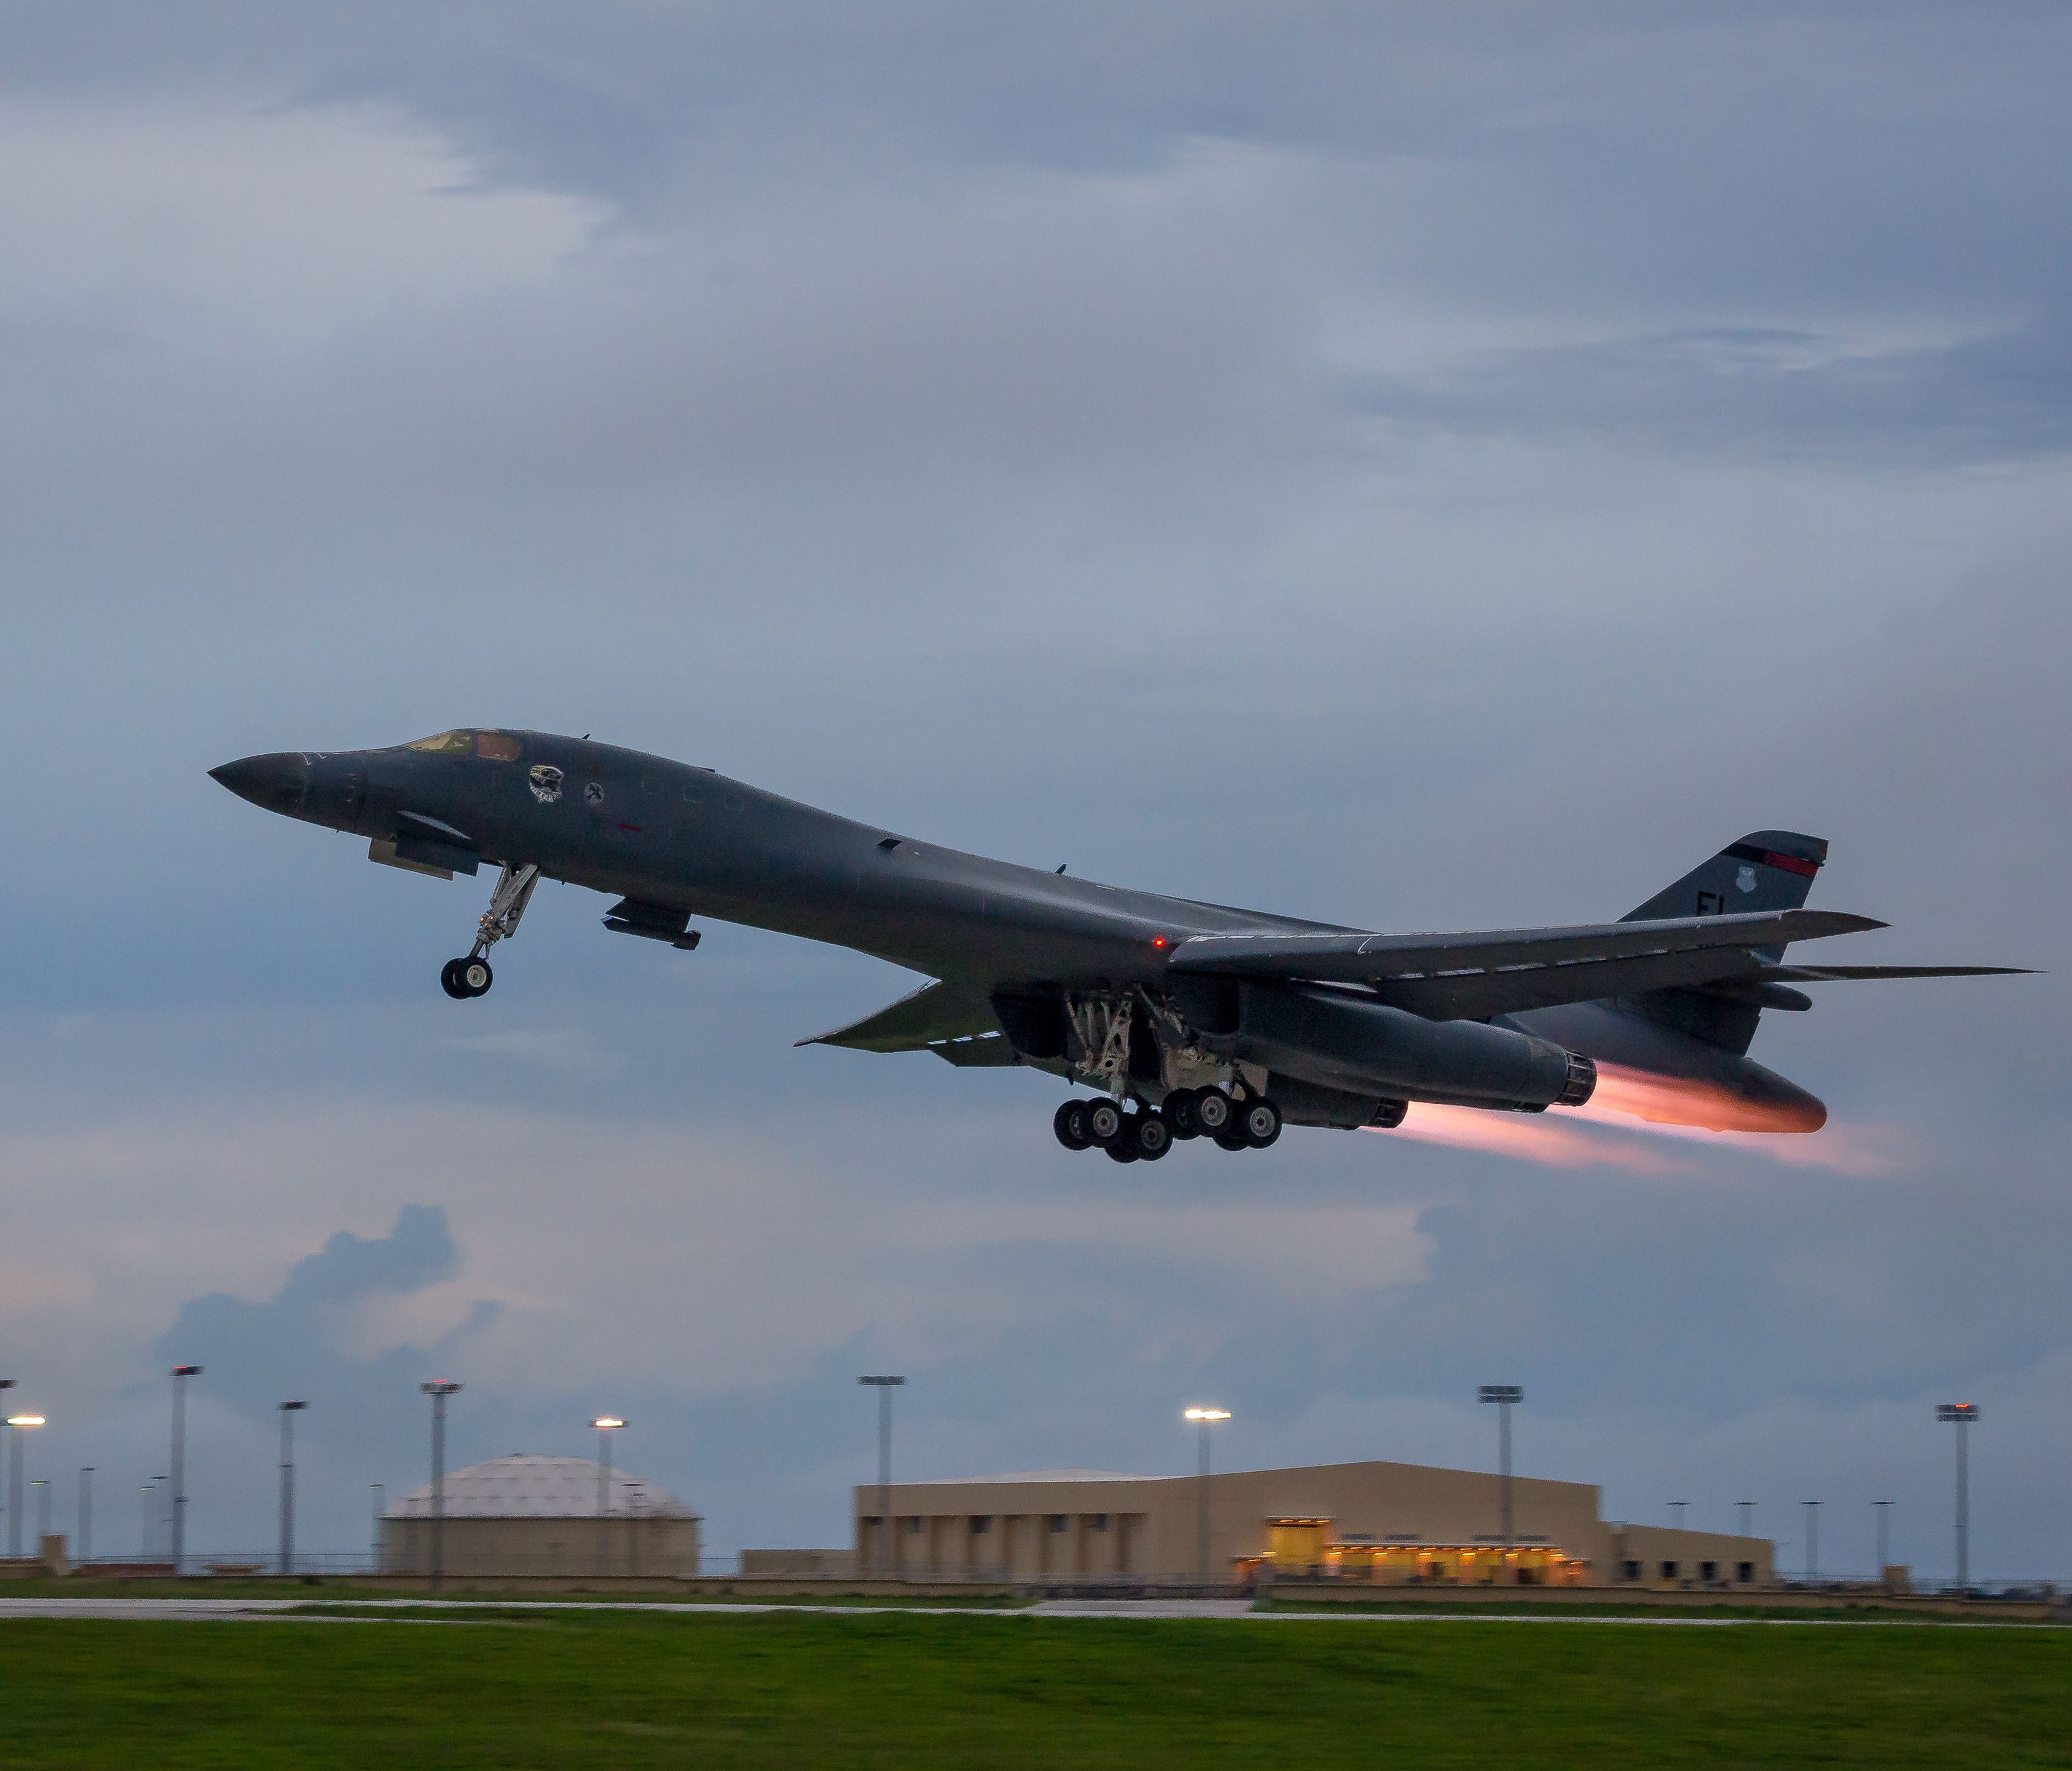 In this U.S. Air Force image obtained from the Defense Department, a U.S. B-1B Lancer takes off from Andersen Air Force Base in Guam.